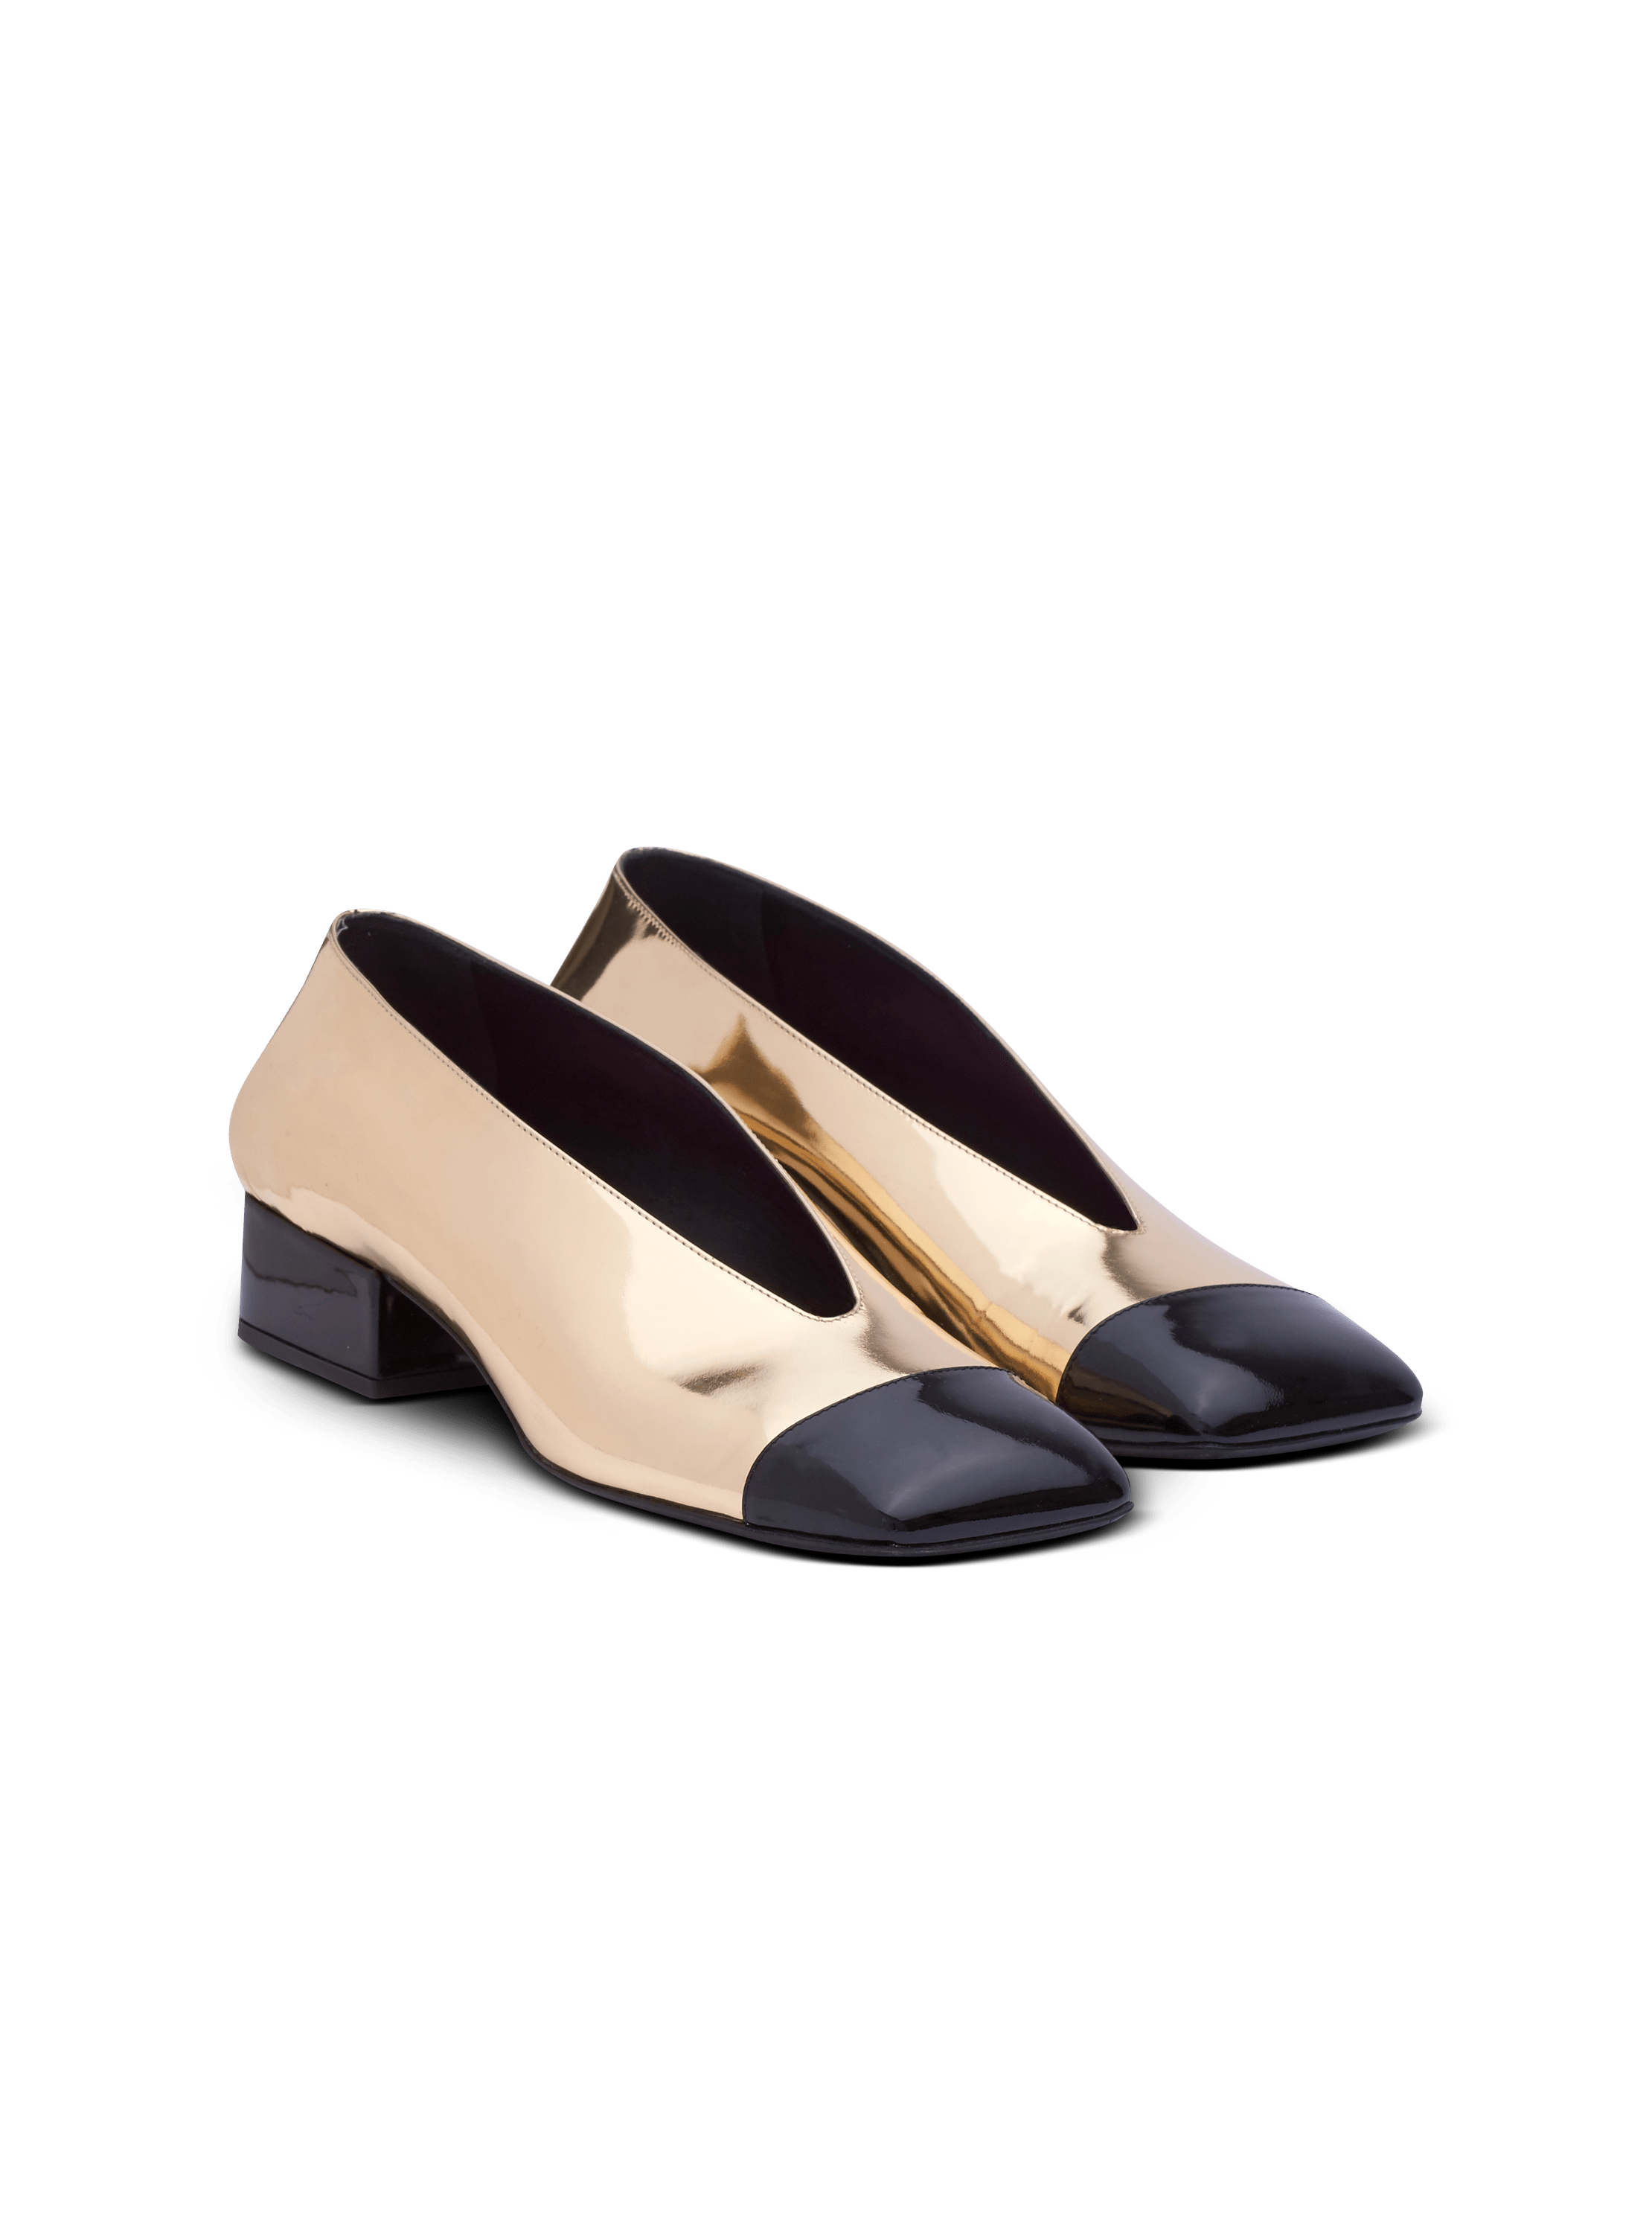 Eden ballet flats in mirrored and patent leather